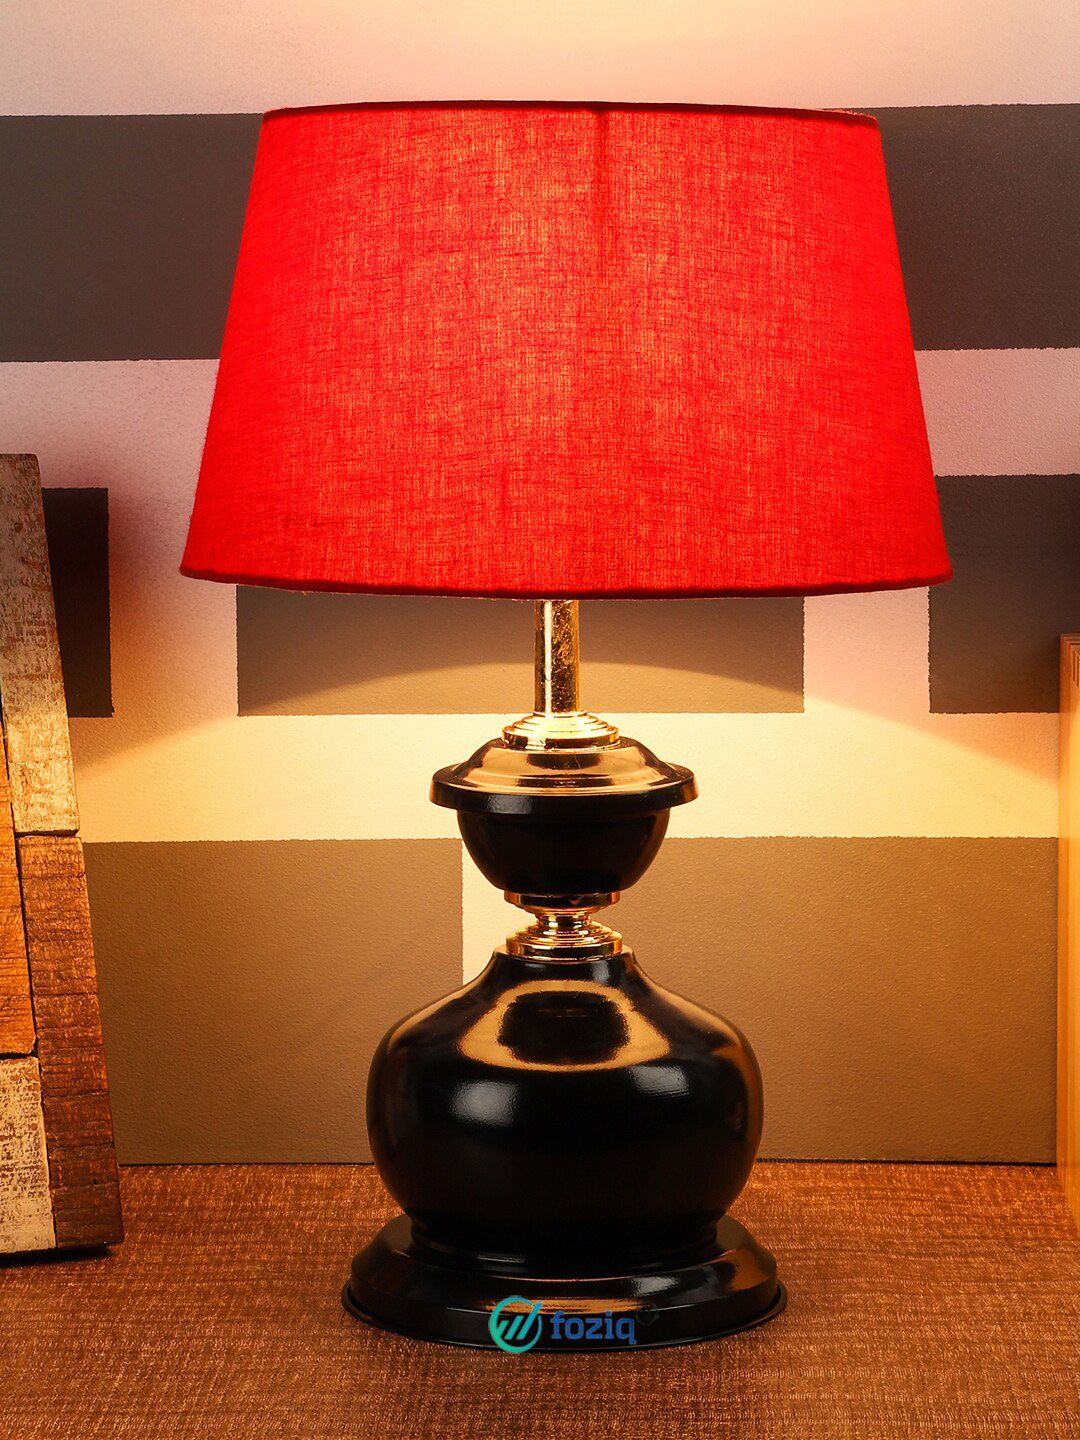 foziq Black & Red Solid Table Lamp with Jute Shade Price in India